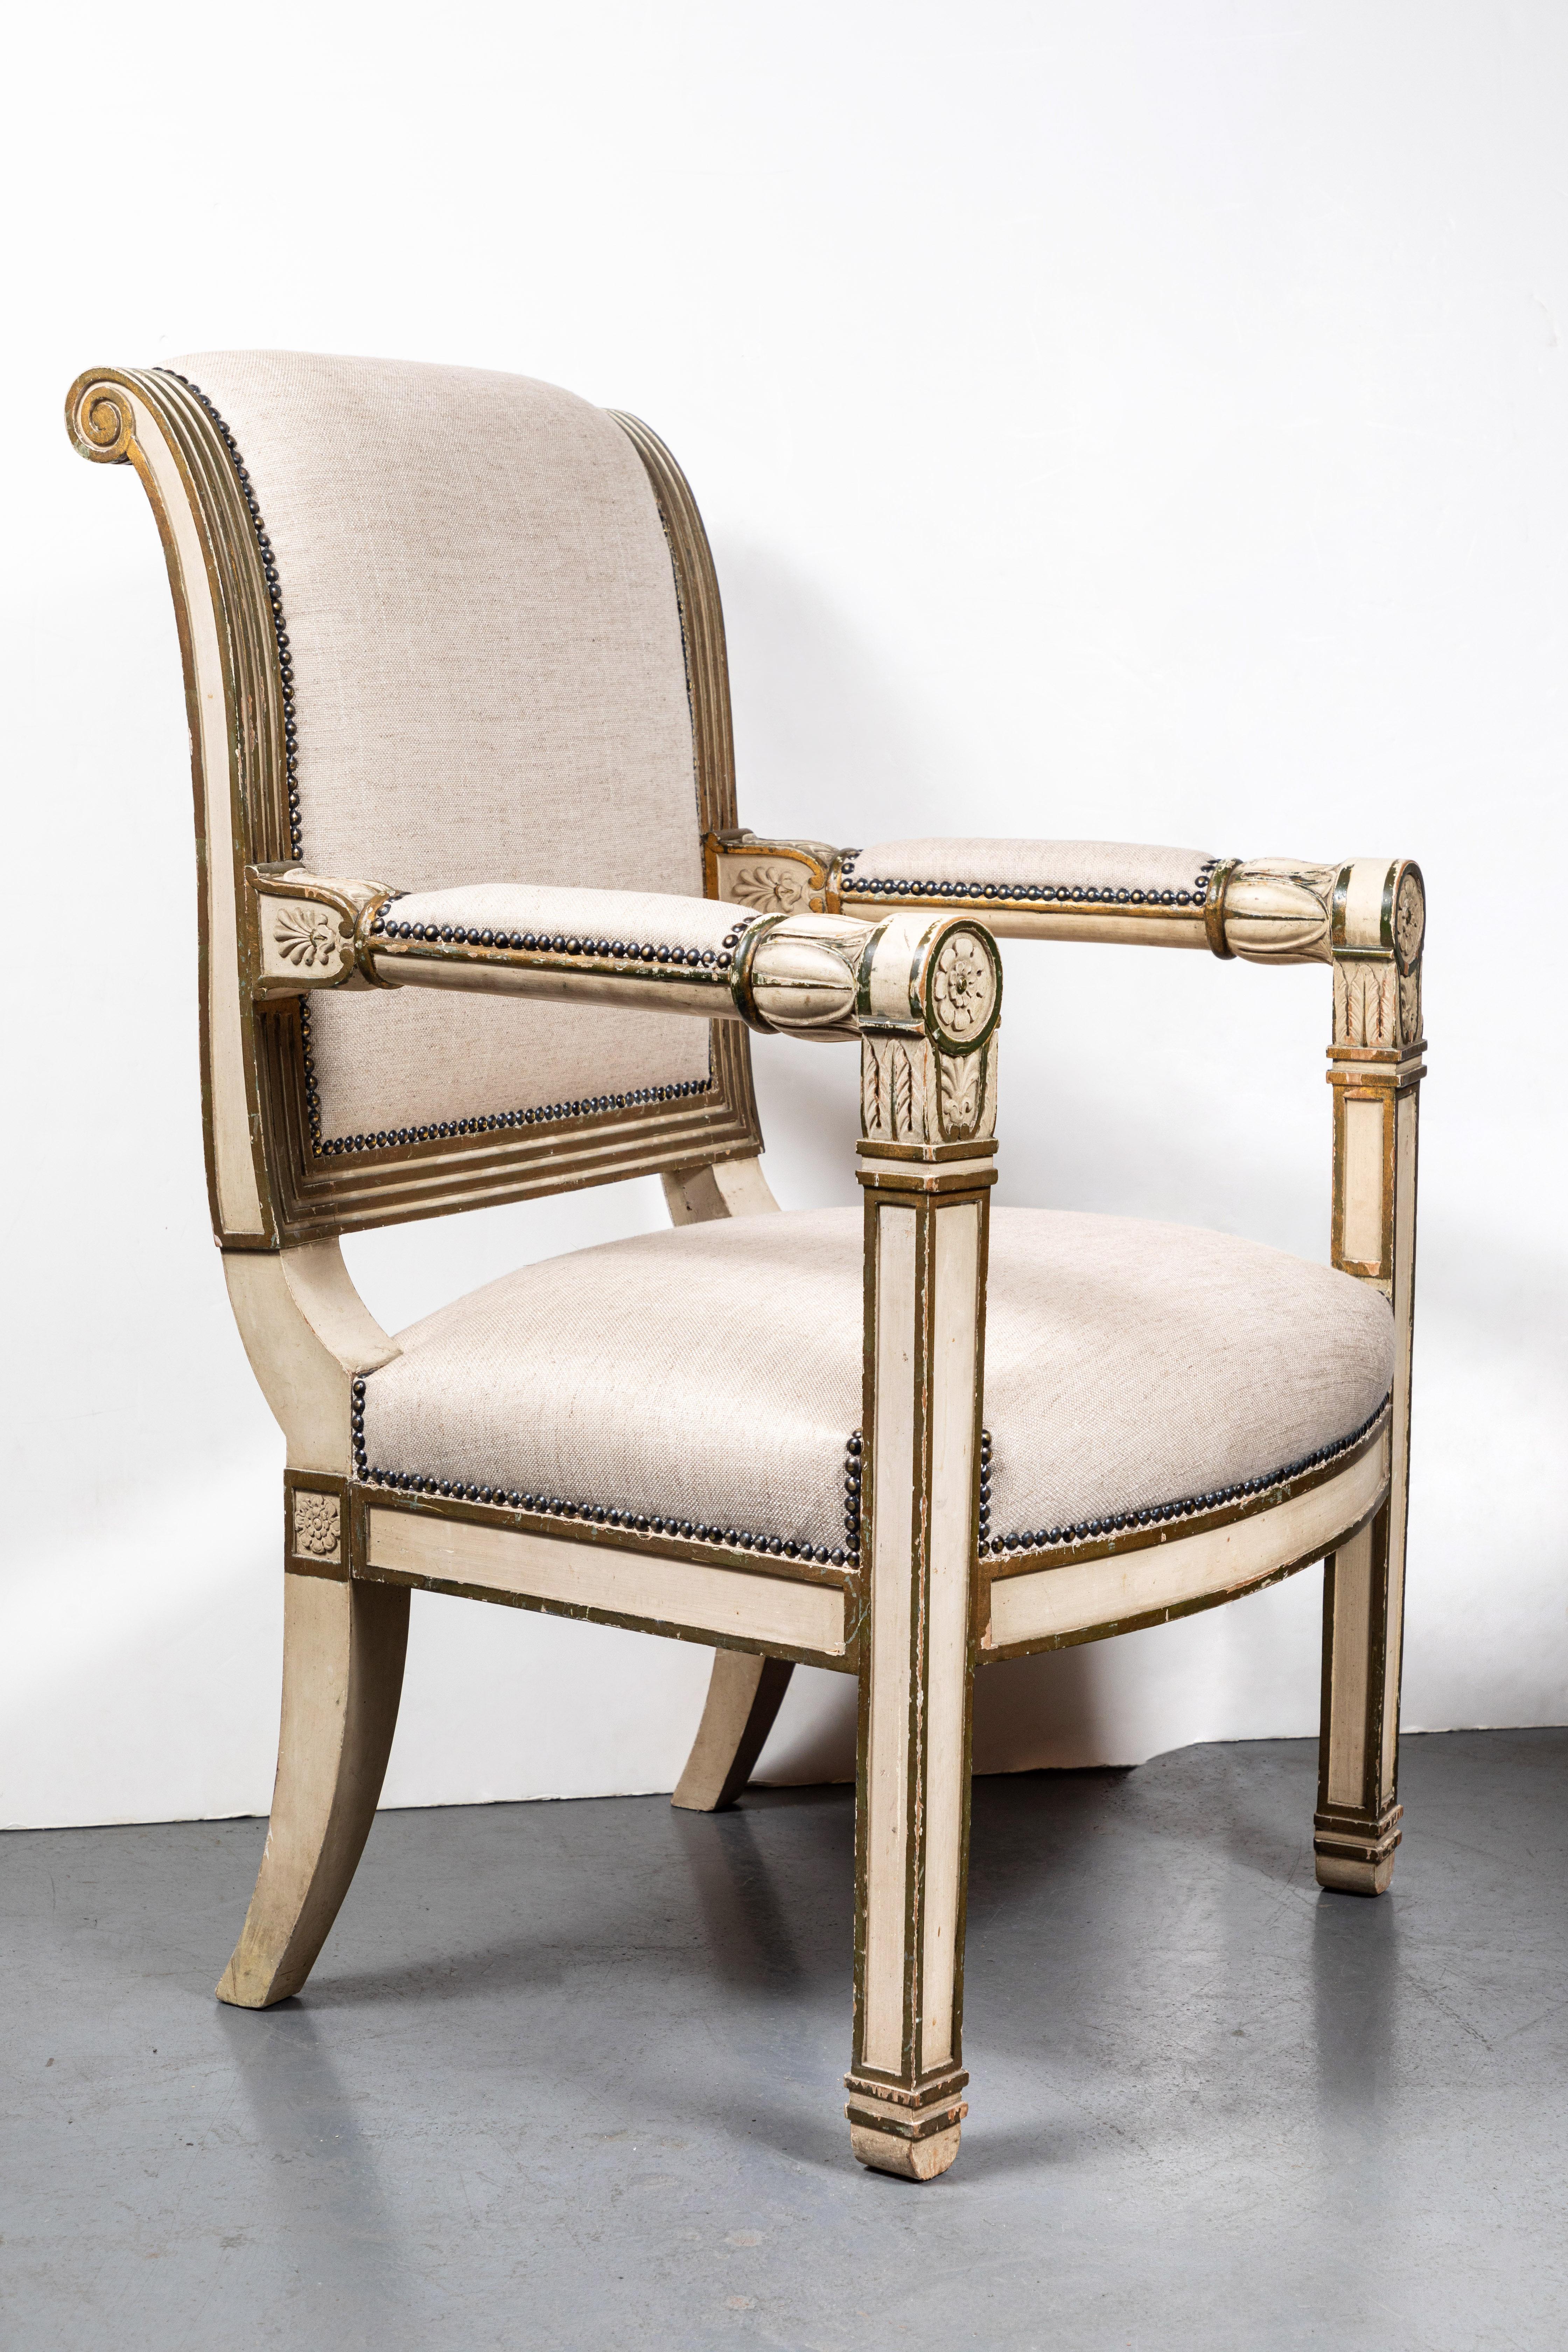 Beautifully proportioned, crème painted and parcel-gilt, neoclassical style, Italian armchair. The arms featuring petals and foliate, relief carved embellishments. The back terminates in graceful semi-scroll. Upholstered in contemporary linen.